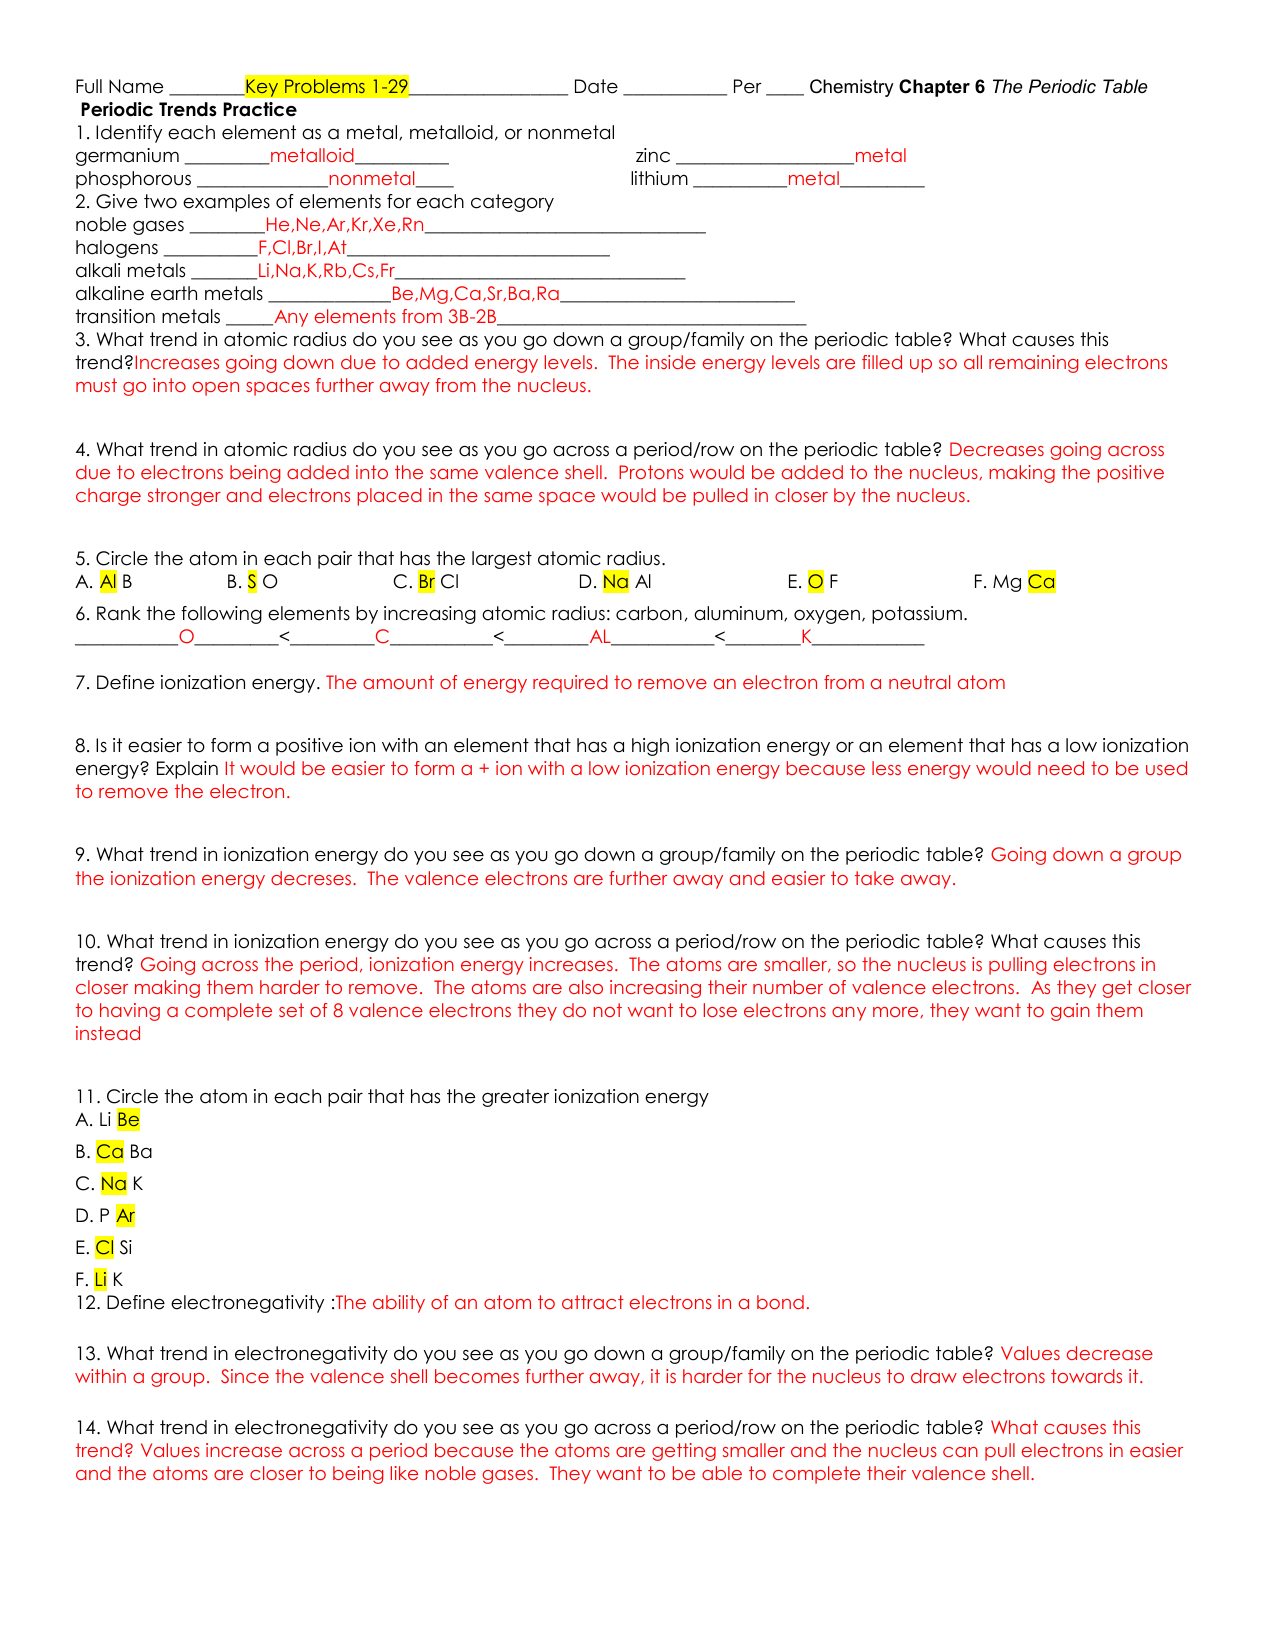 Periodic Trends Practice Answer Key For Periodic Trends Practice Worksheet Answers